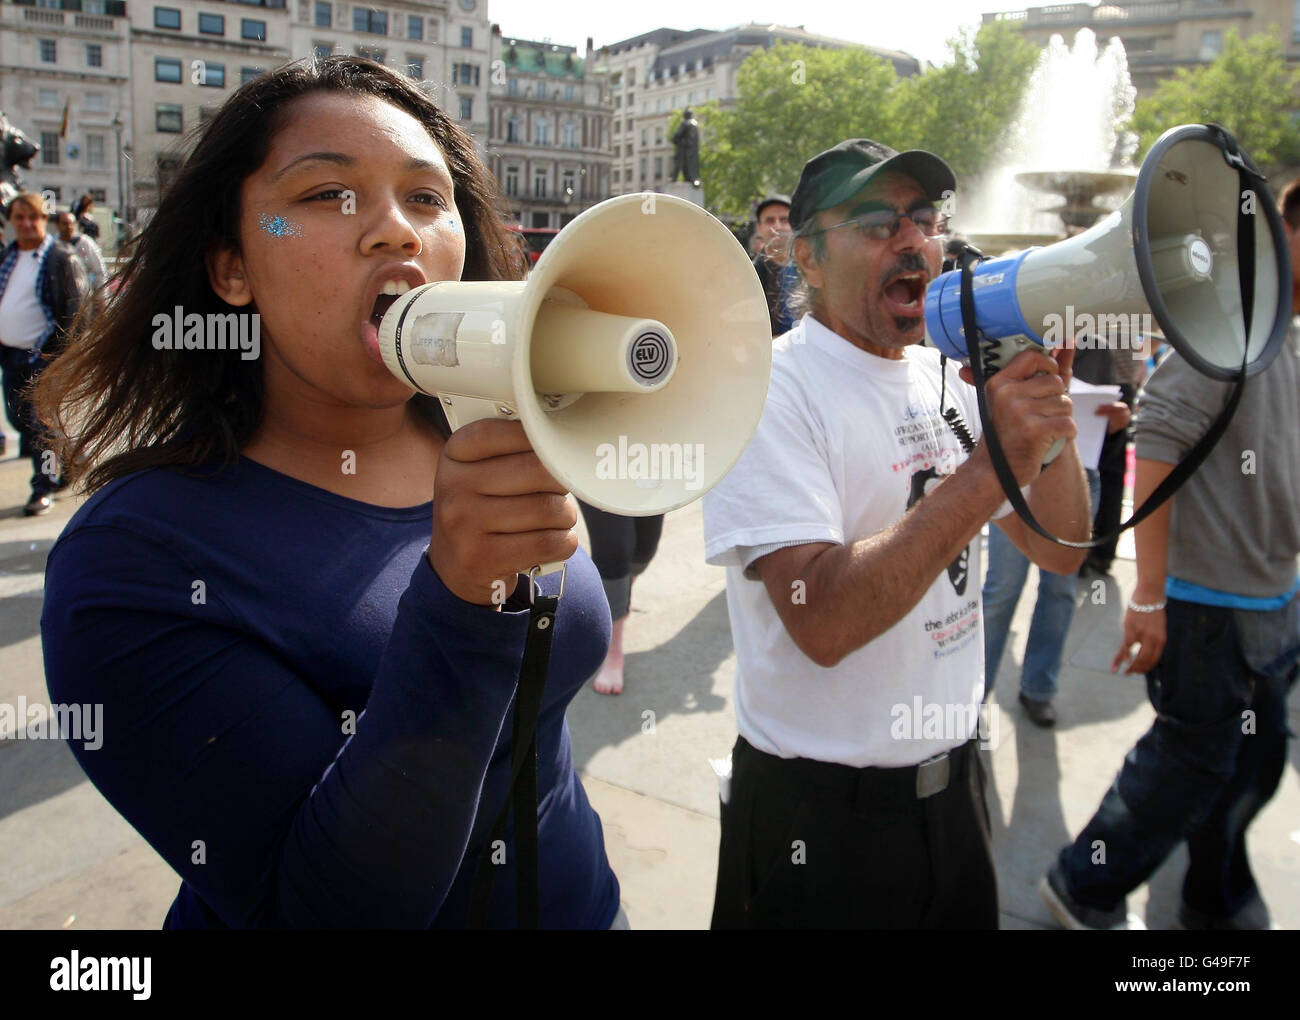 Demonstrators at a rally in Trafalgar Square as part of the May Day protests in central London. Stock Photo